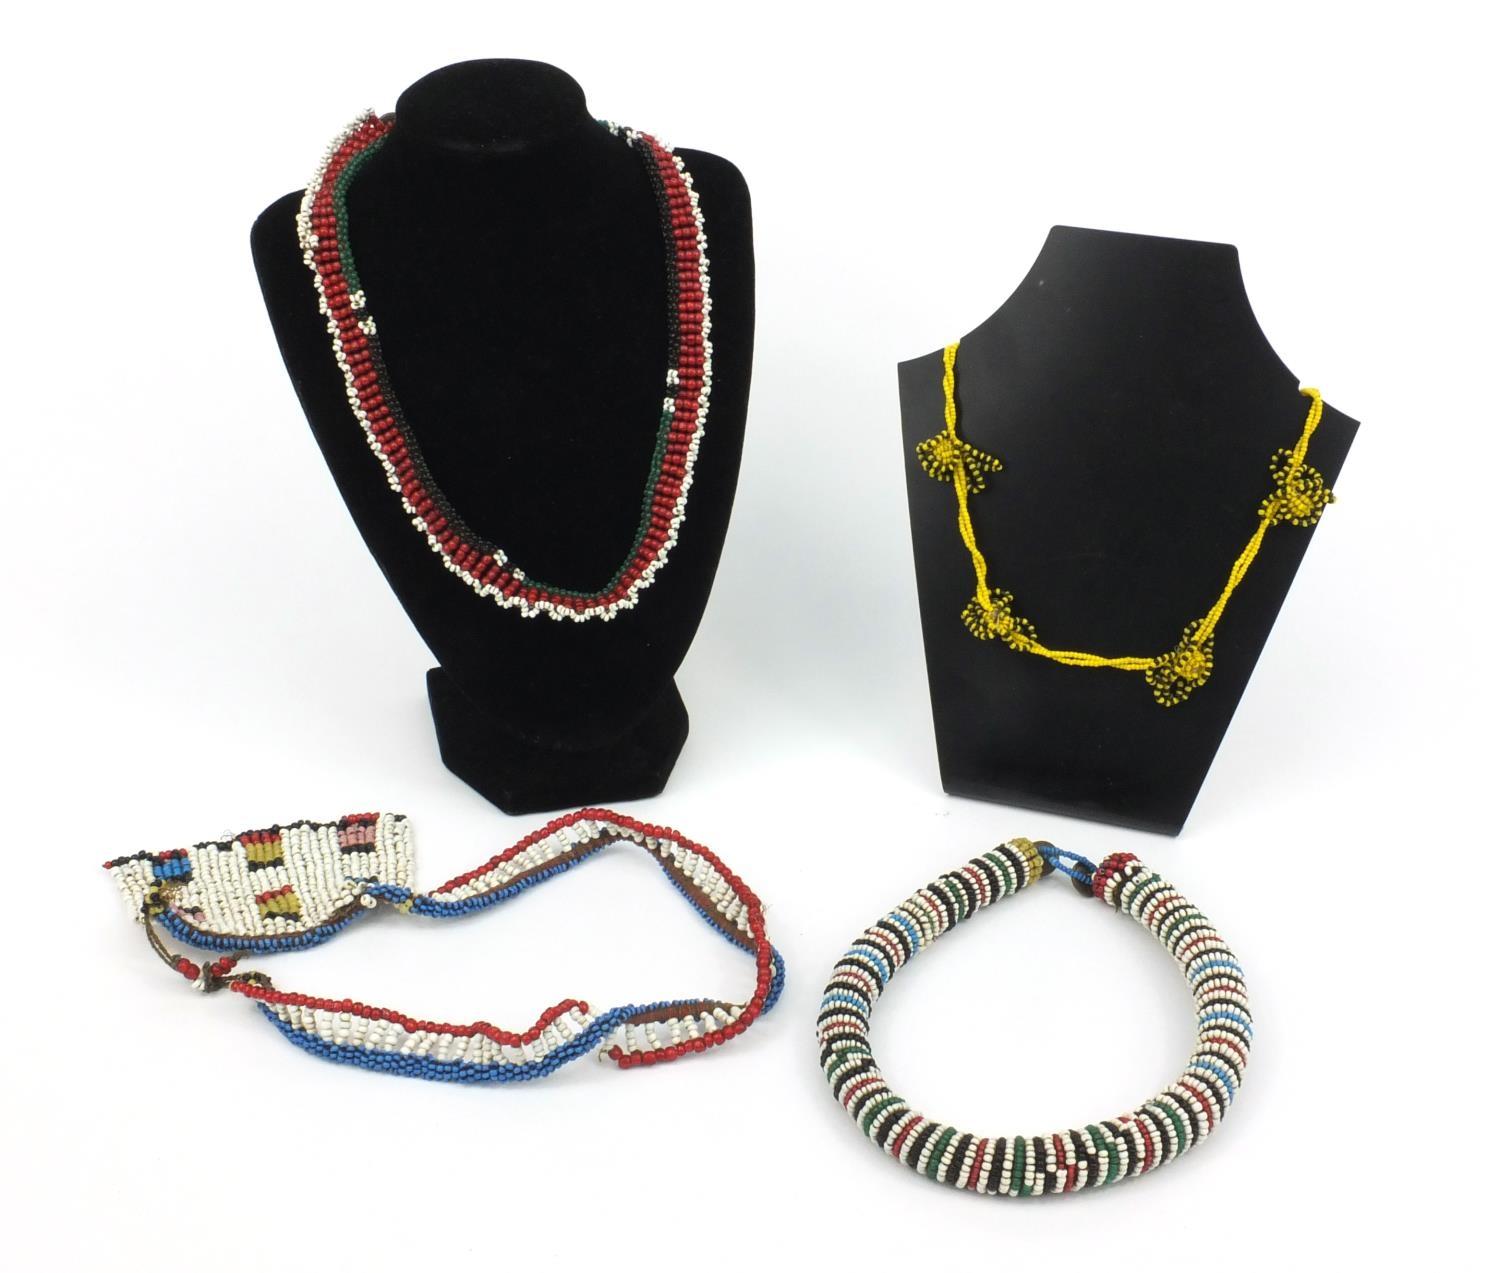 Four tribal beadwork necklaces, the largest 27cm long